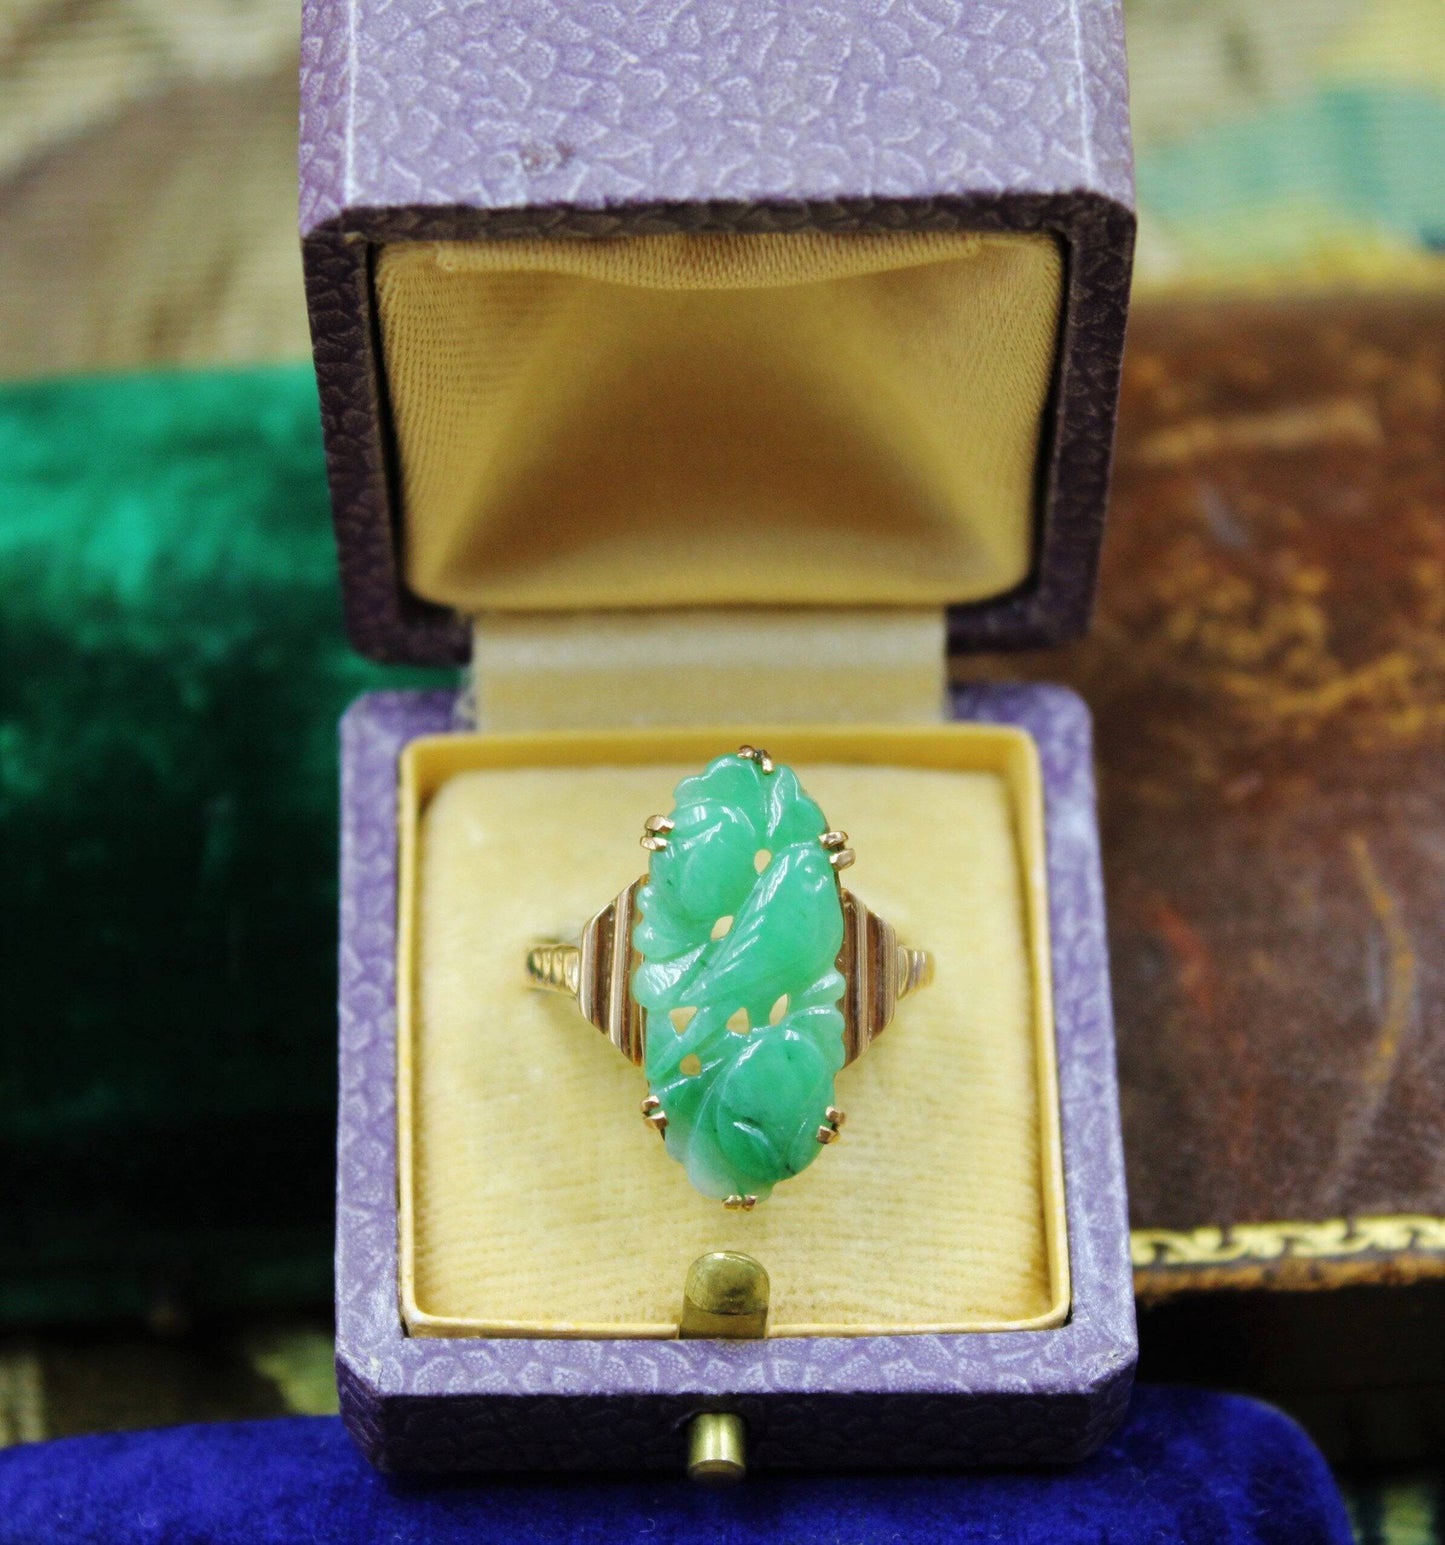 A superb Art Deco Carved Natural Jadeite Ring set in 9ct Yellow Gold, Circa 1930 - Robin Haydock Antiques